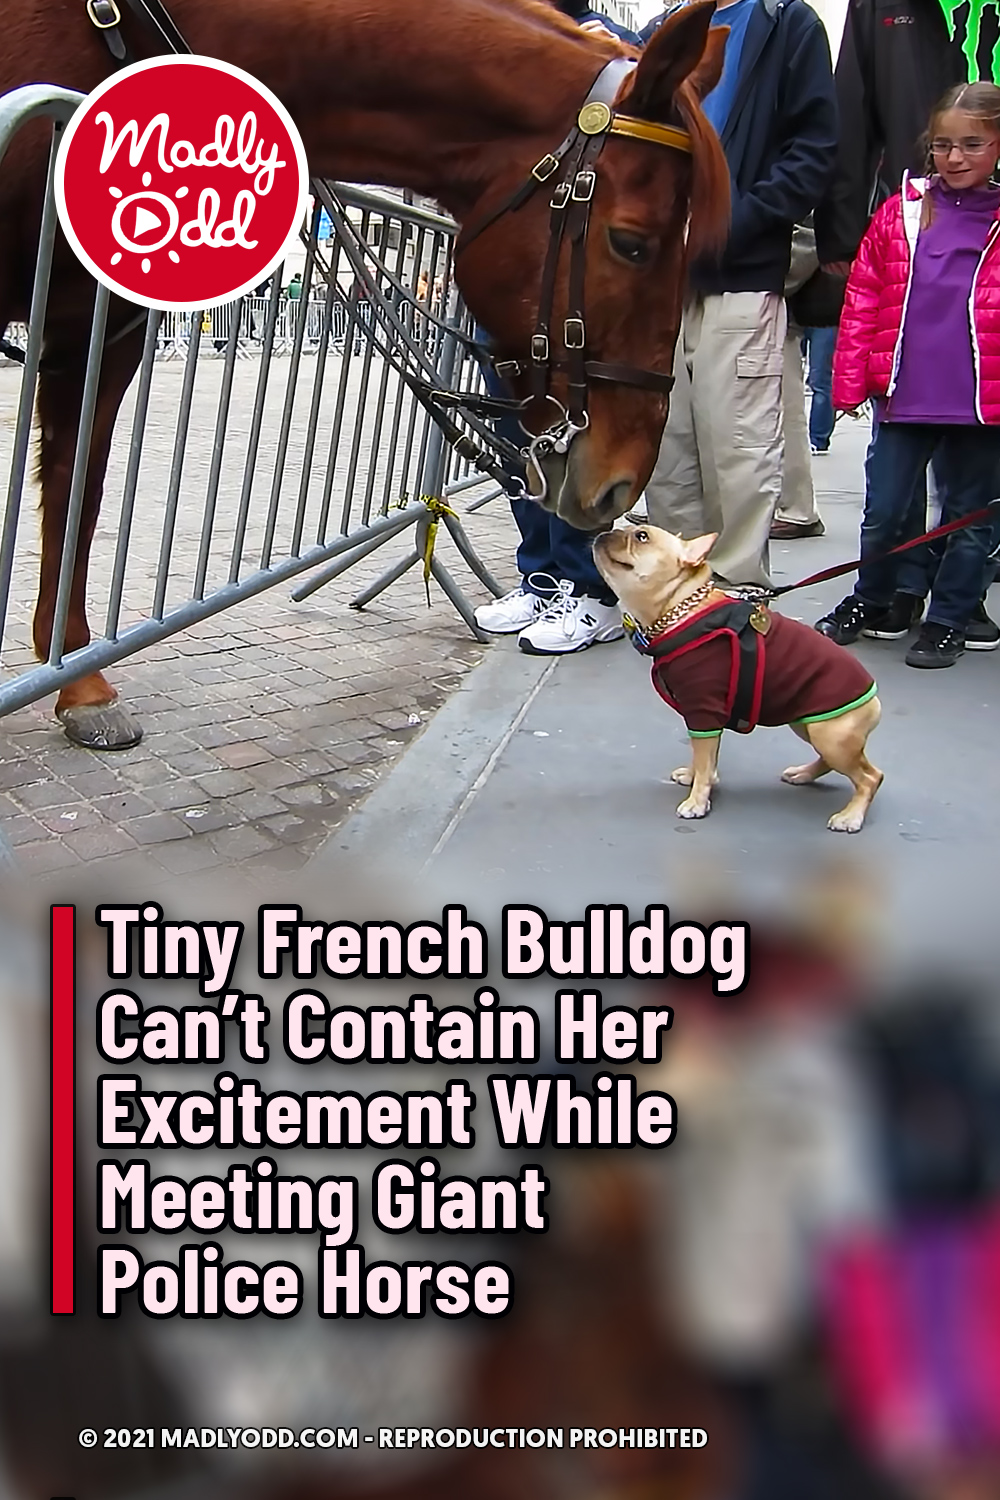 Tiny French Bulldog Can’t Contain Her Excitement While Meeting Giant Police Horse